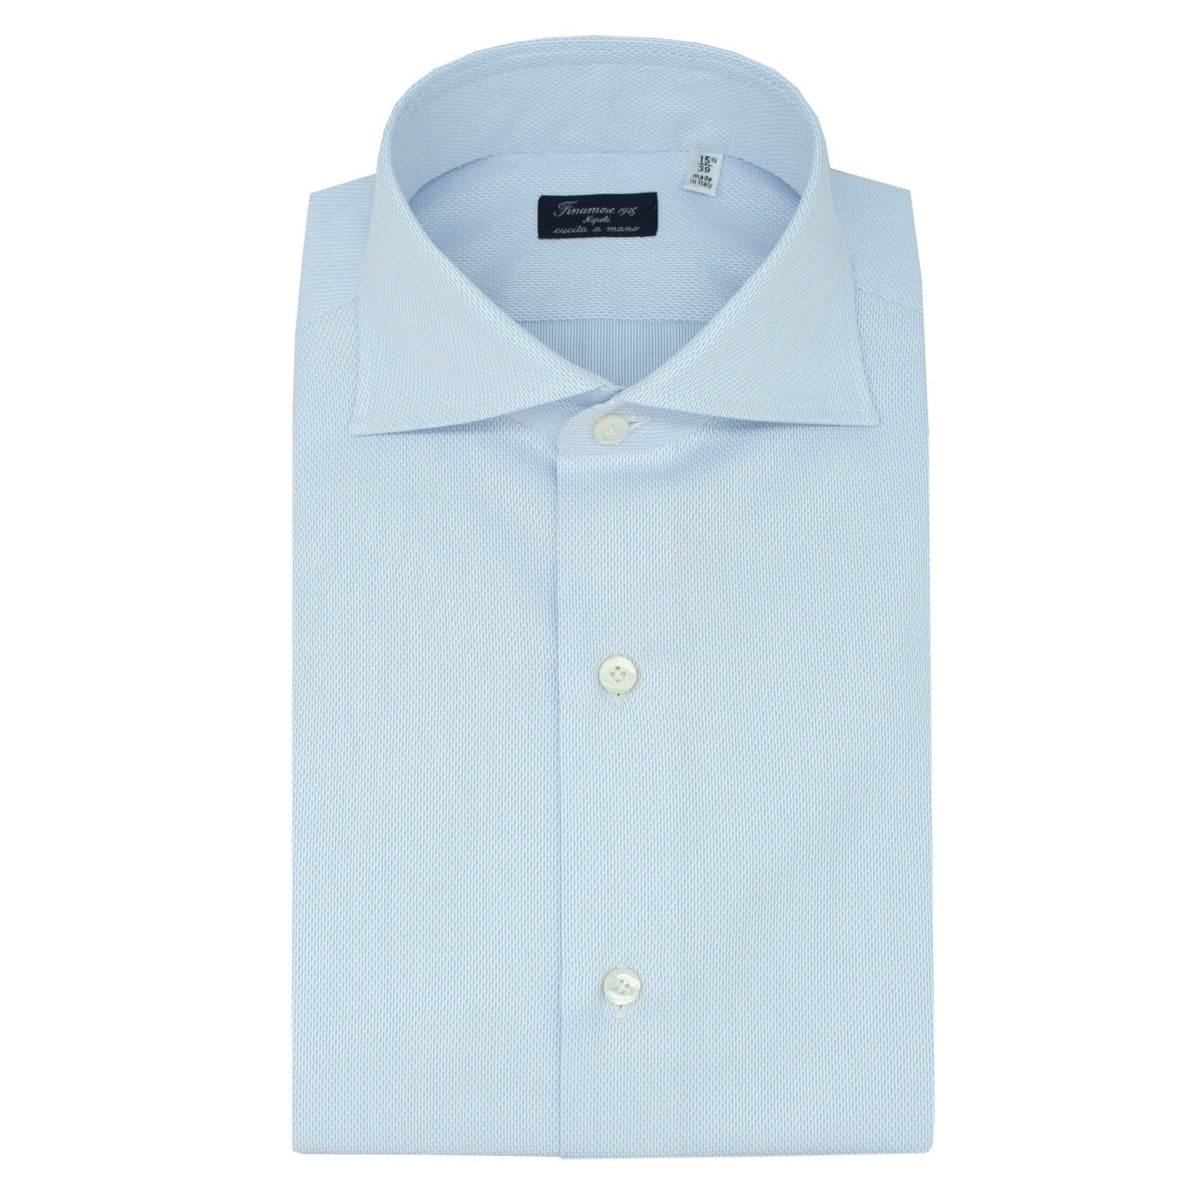 Classic Napoli shirt in white cotton pique with light blue details